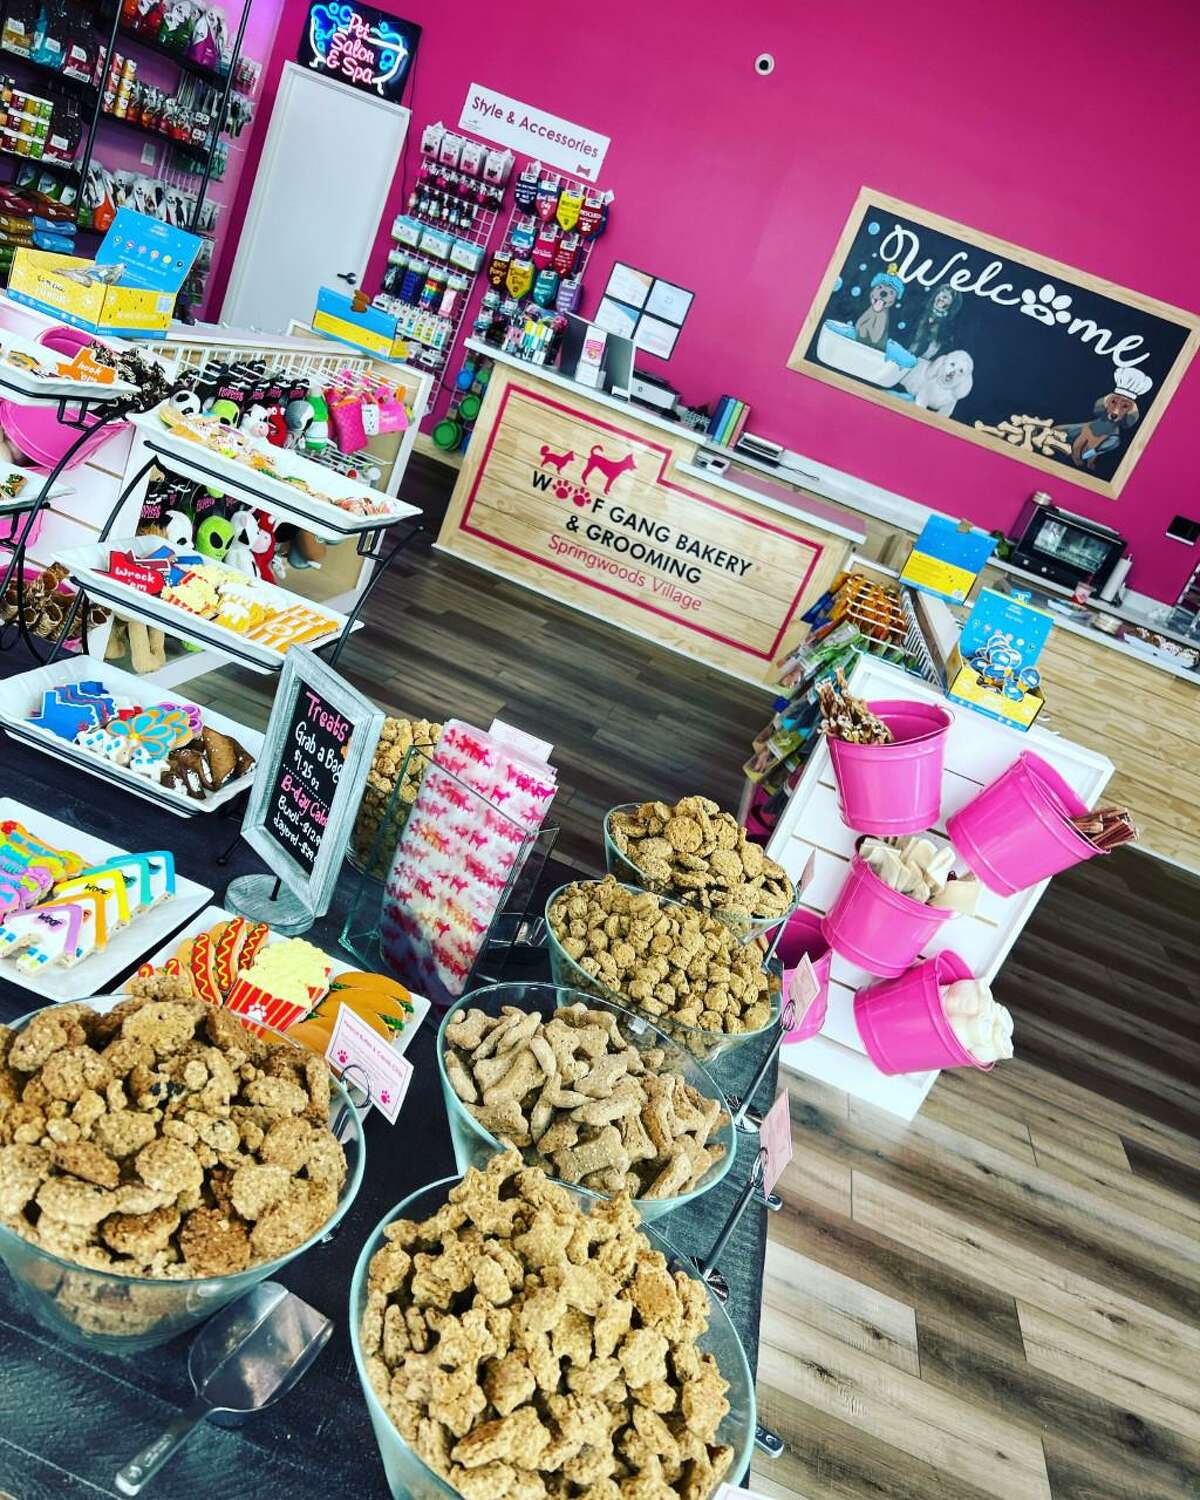 Woof Gang Bakery & Grooming held its grand opening this past weekend along with an adoption event, May 7, at Springwoods Village in Spring, one of two new stores from Amith and Divya Patel, who plan on developing more in the future.